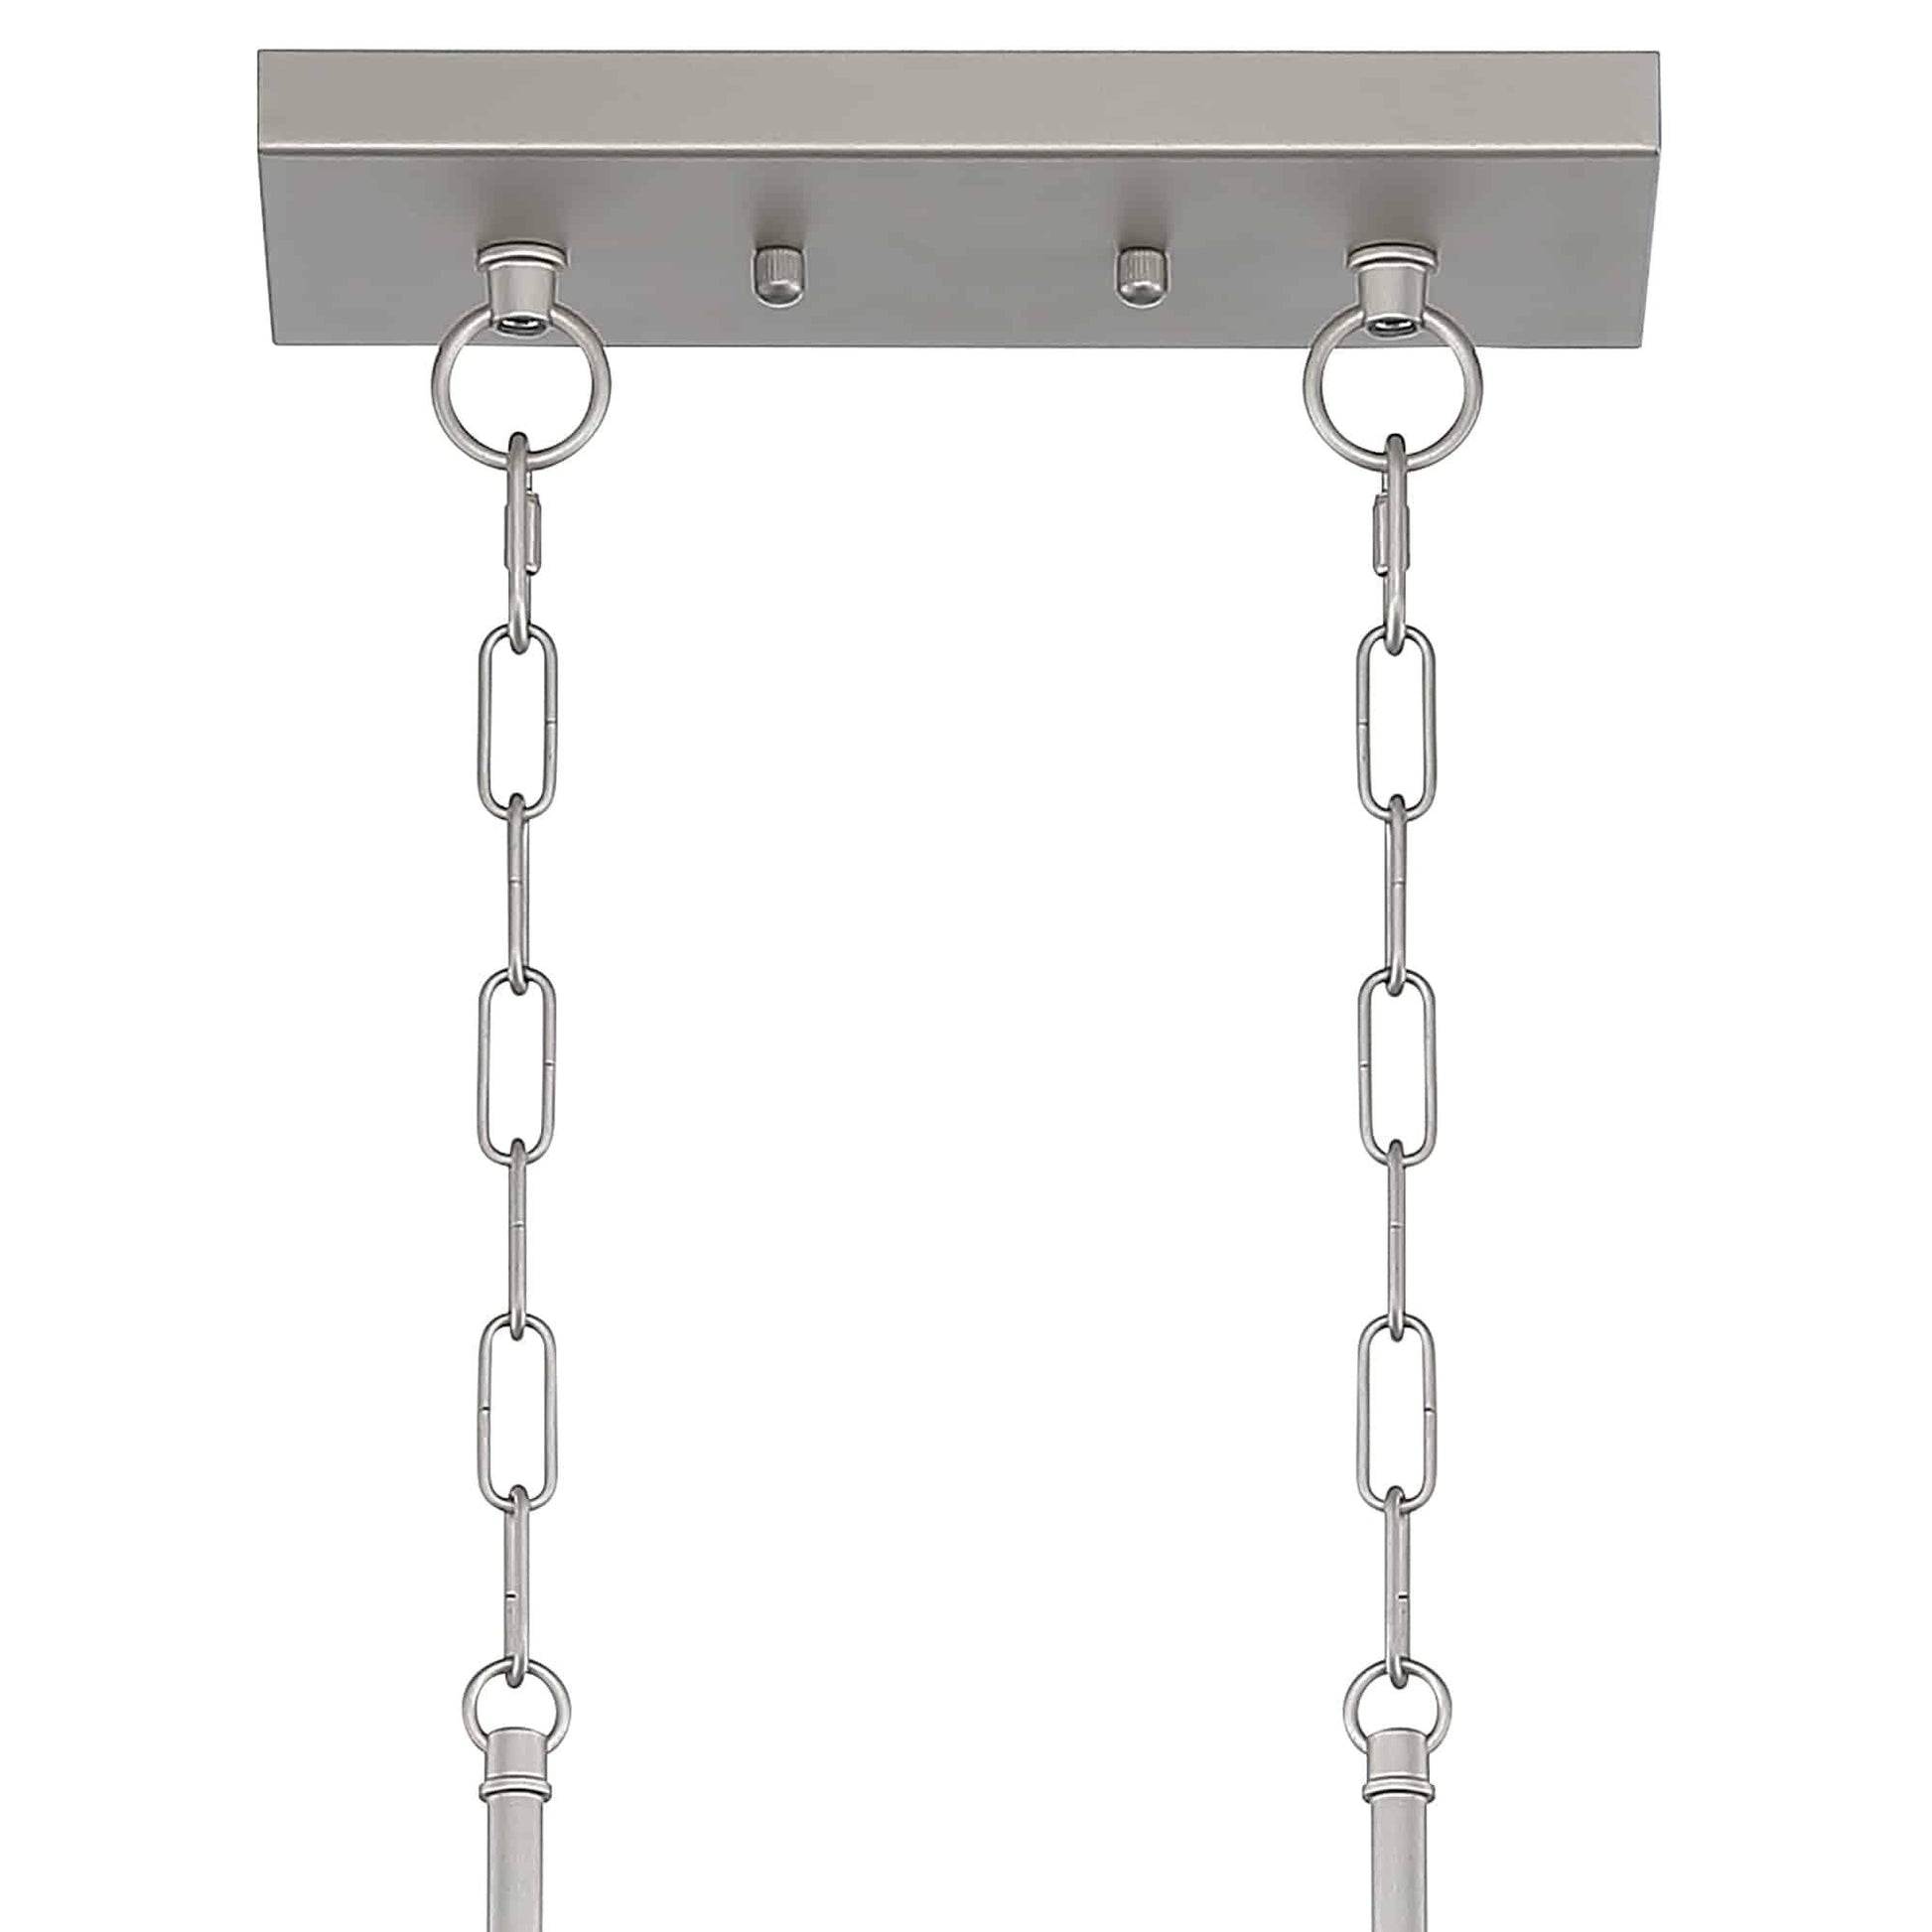 5 light lantern rectangle chandelier with accents (9) by ACROMA